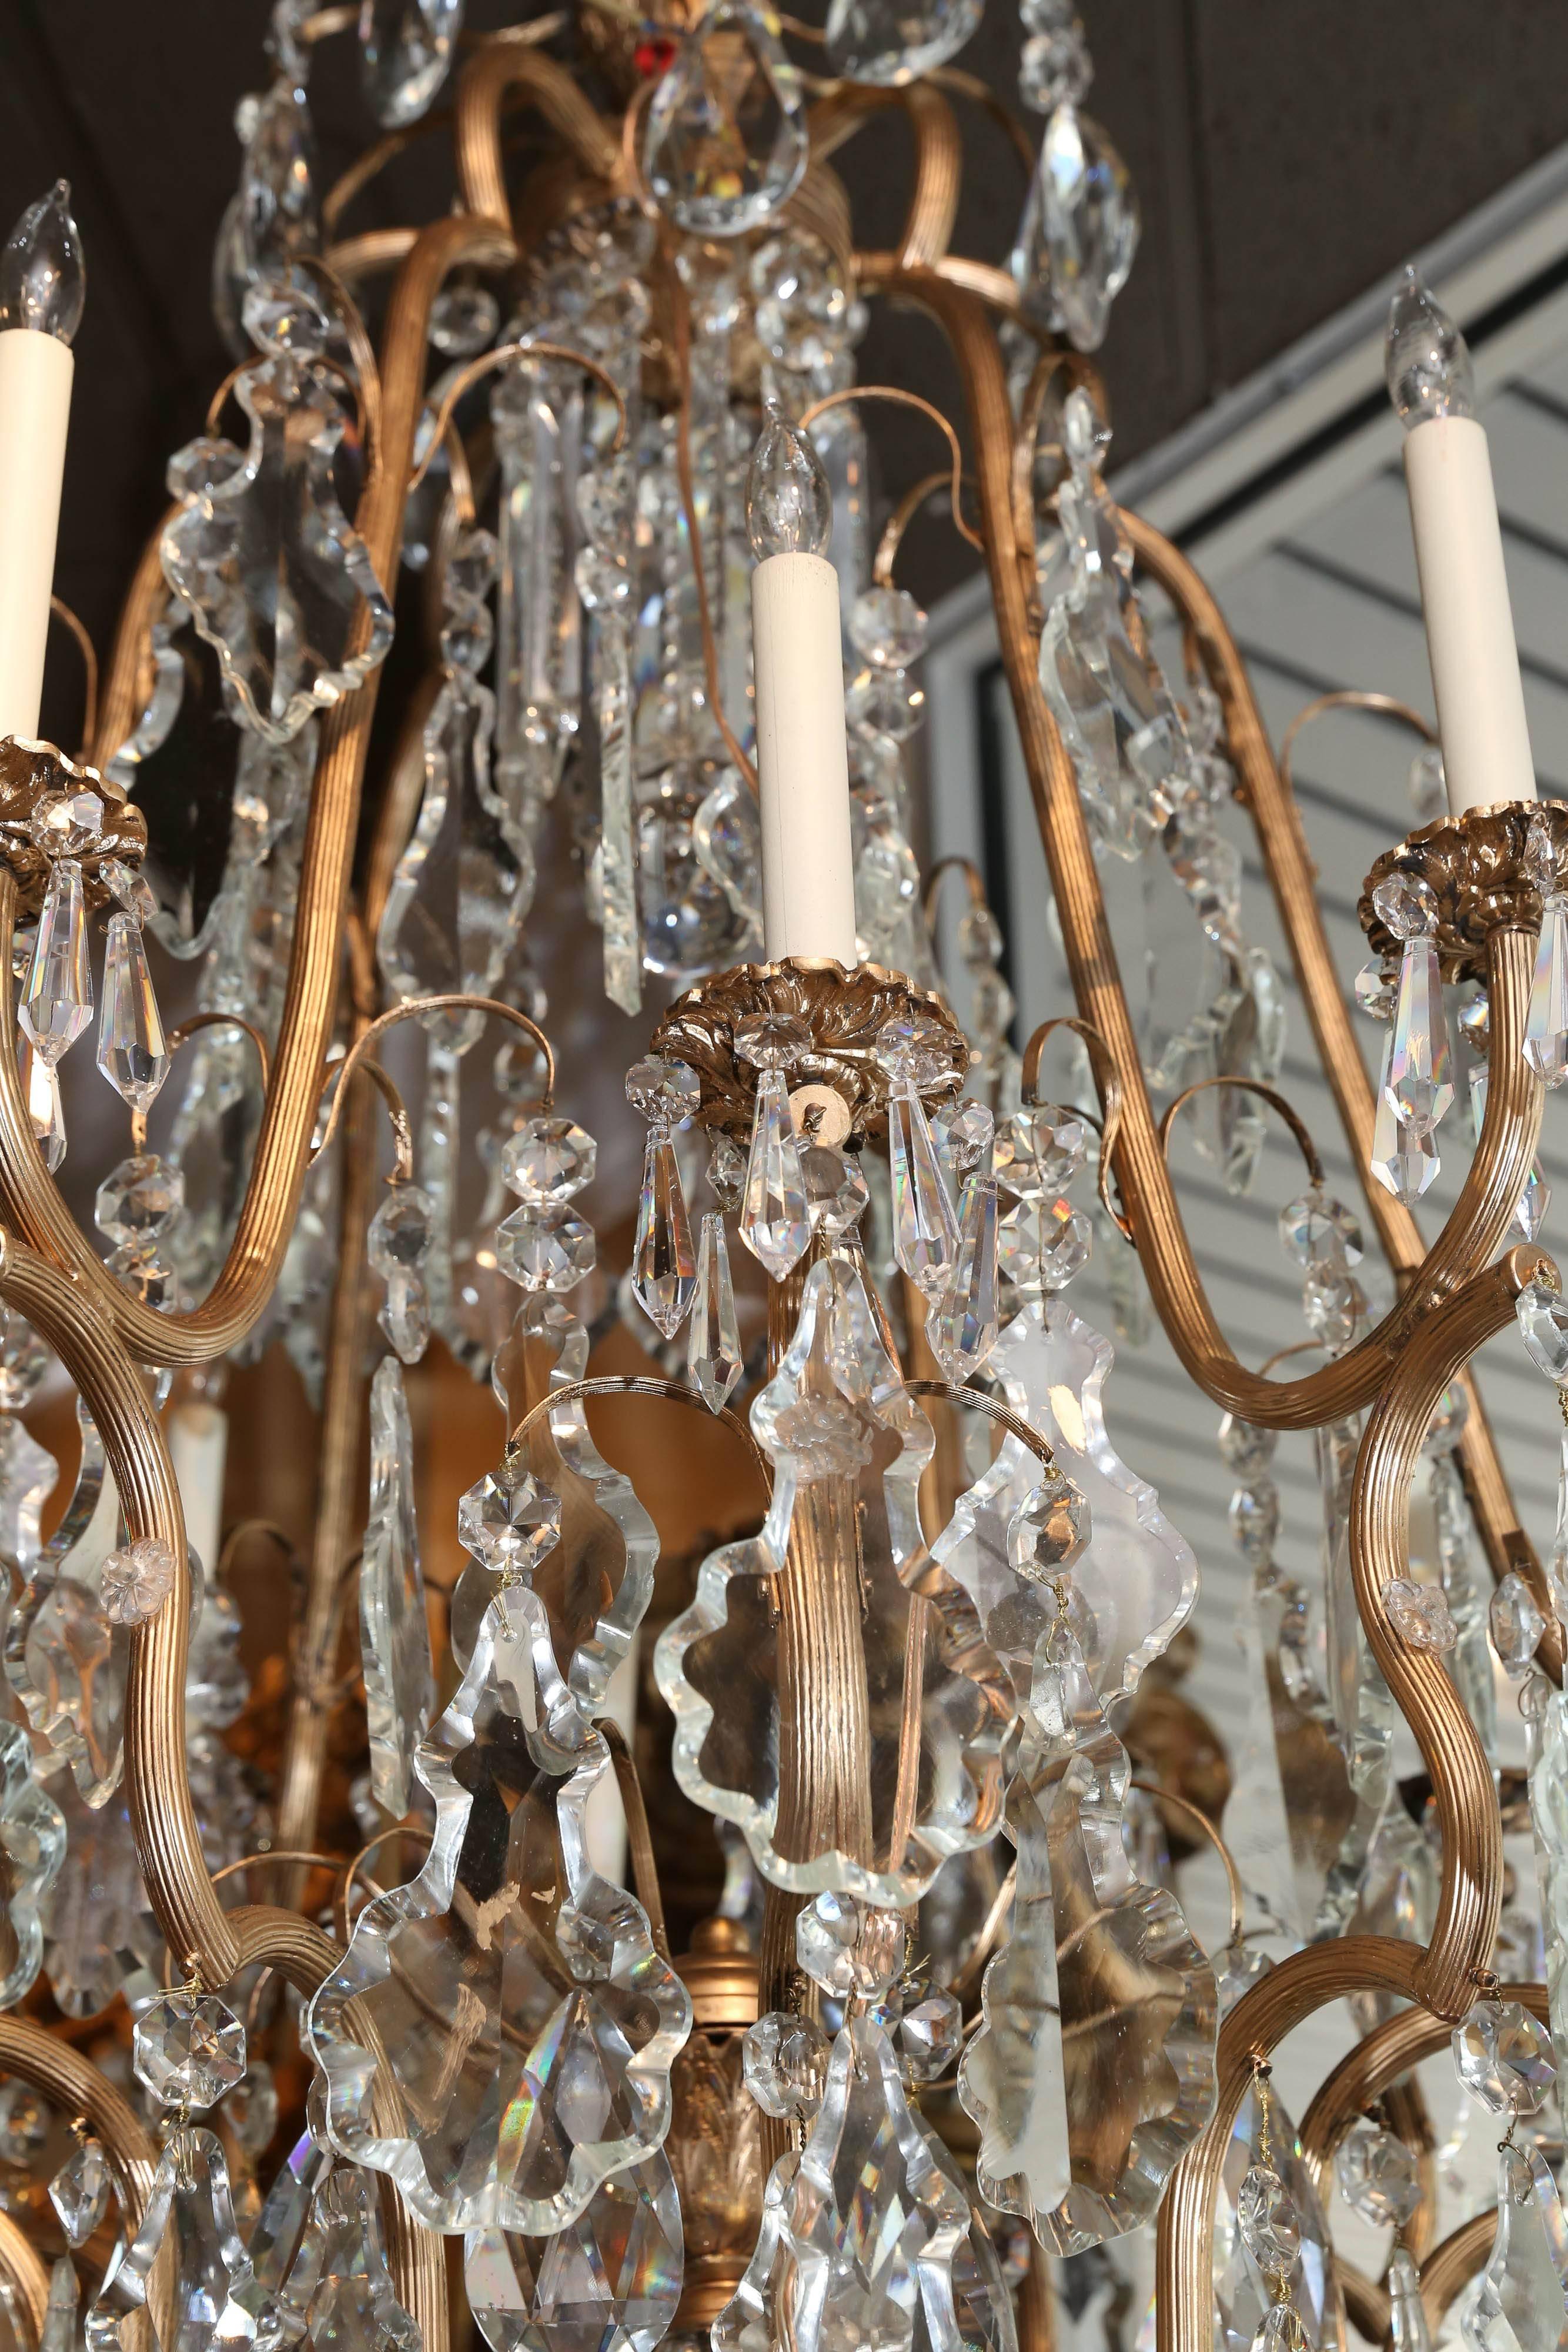 Impressive chandelier with scrolling arms supporting large cut crystal
pendants.

 